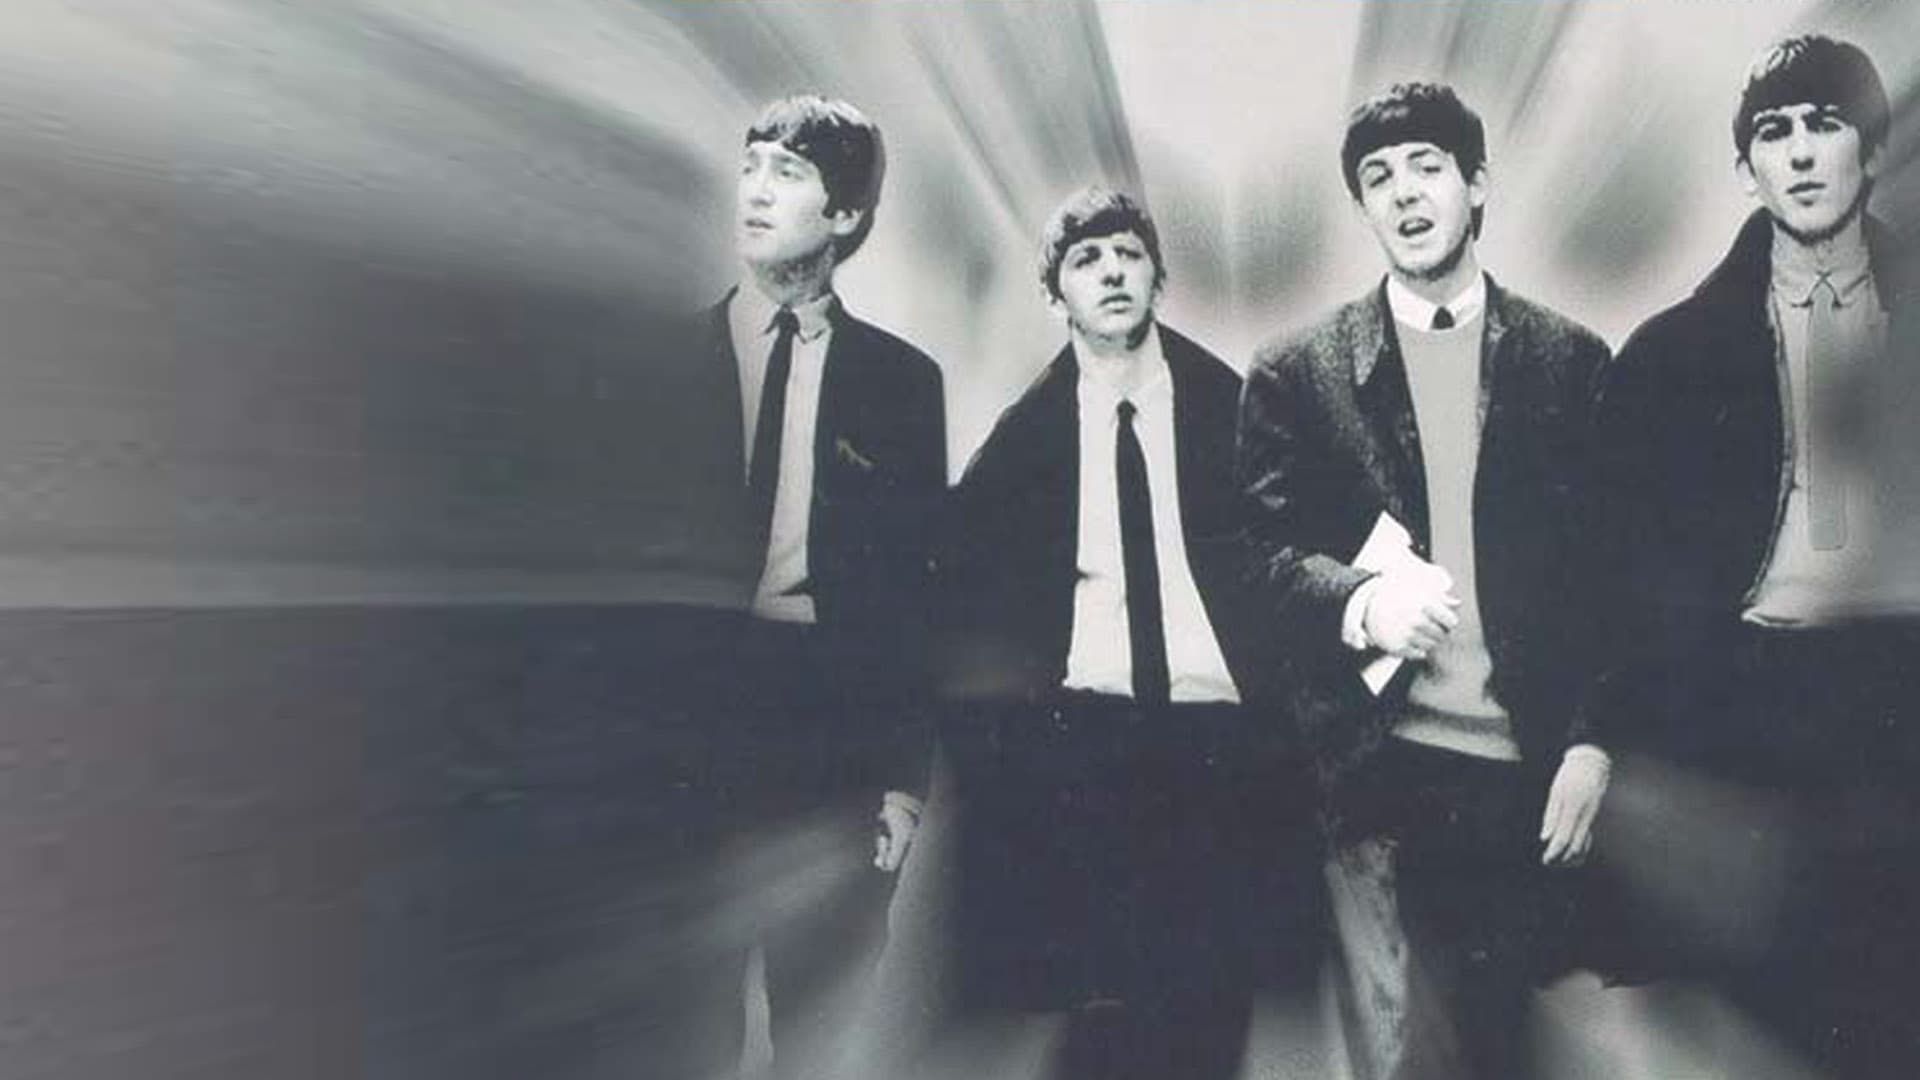 Cubierta de The Beatles: Here, There and Everywhere (Vídeo musical)